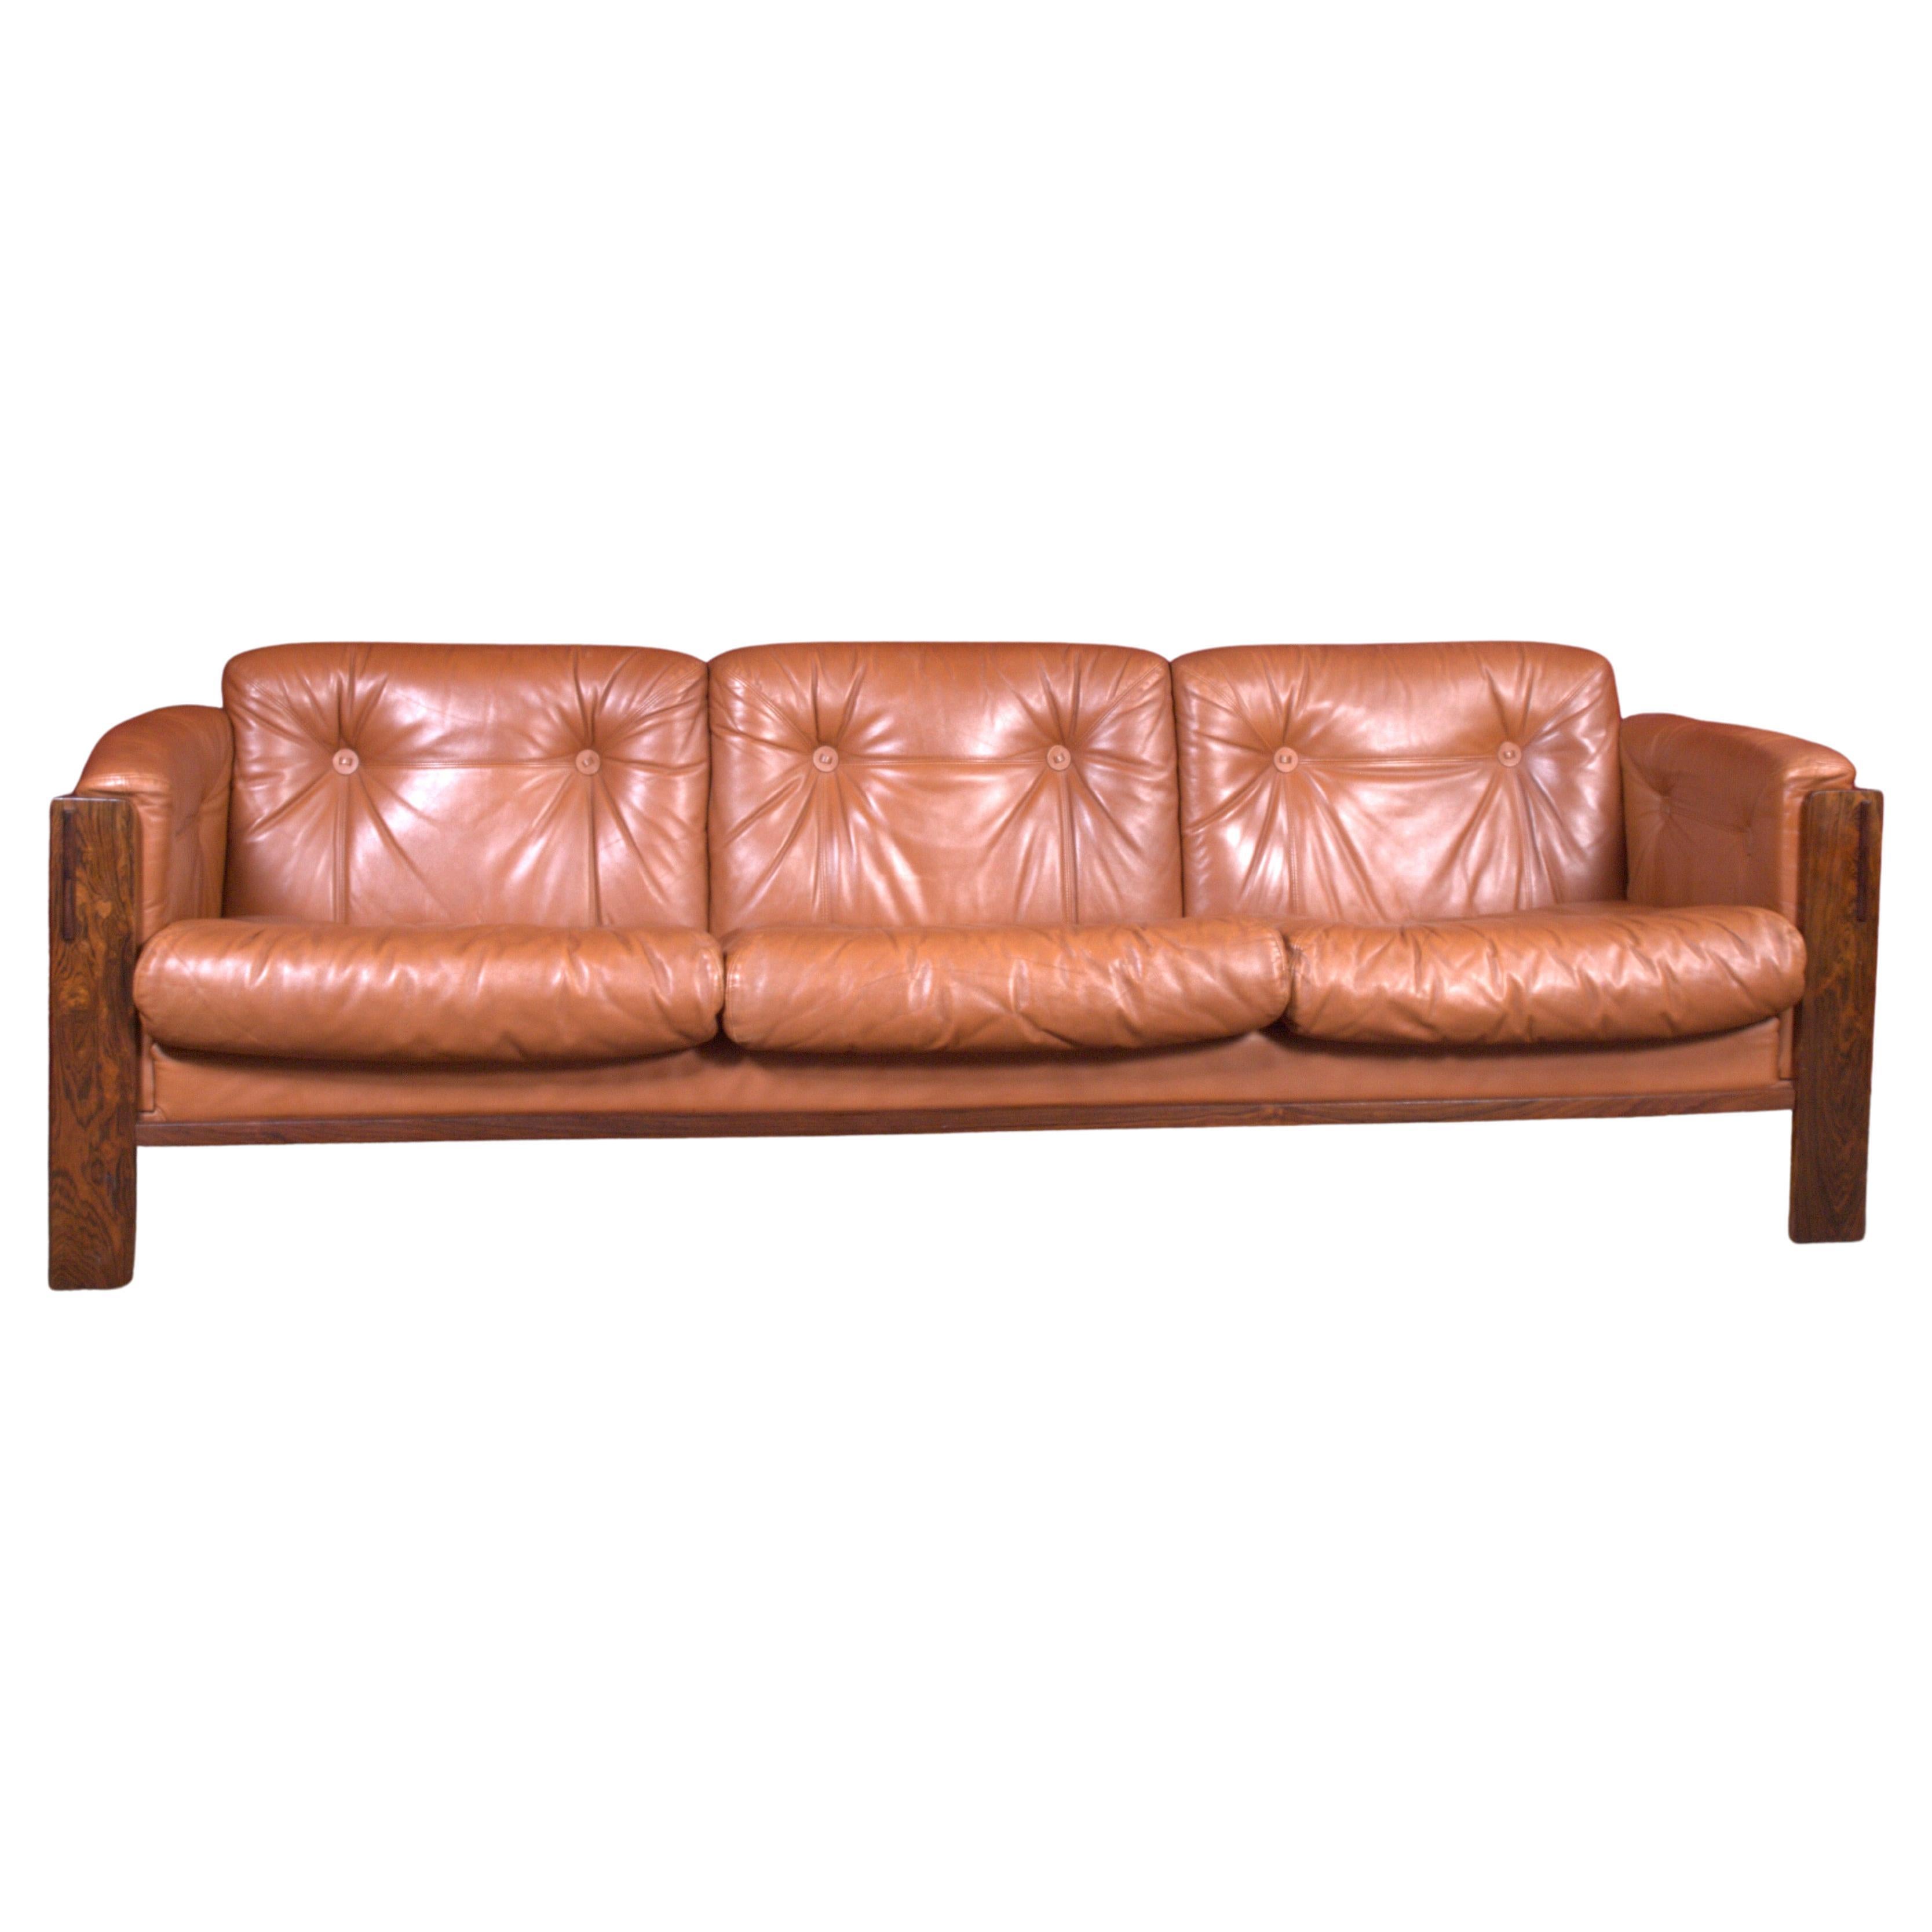 Scandinavian Midcentury Rosewood Leather Couch / Sofa